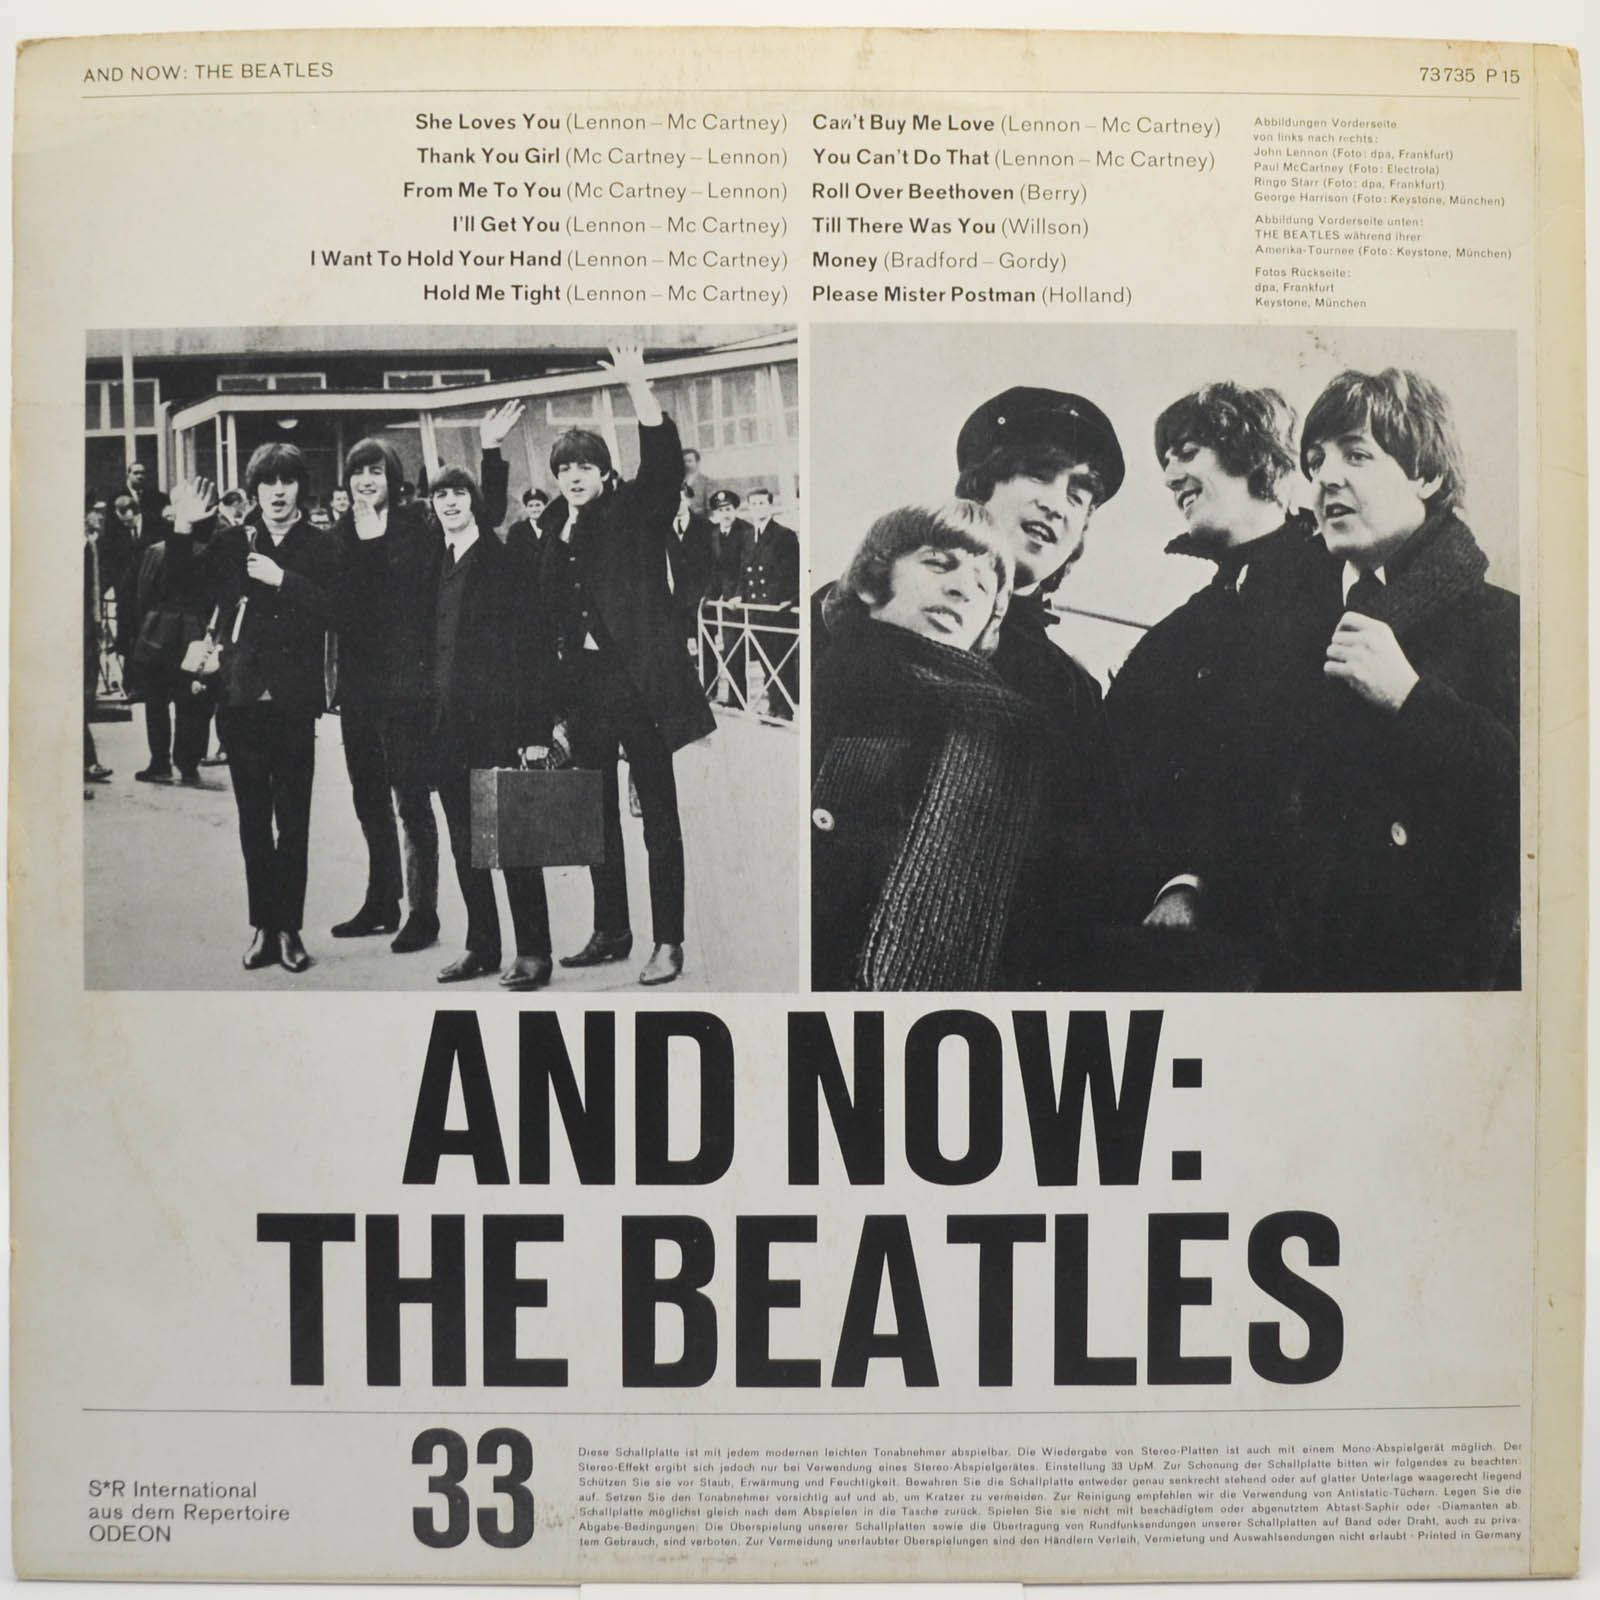 Now and then beatles